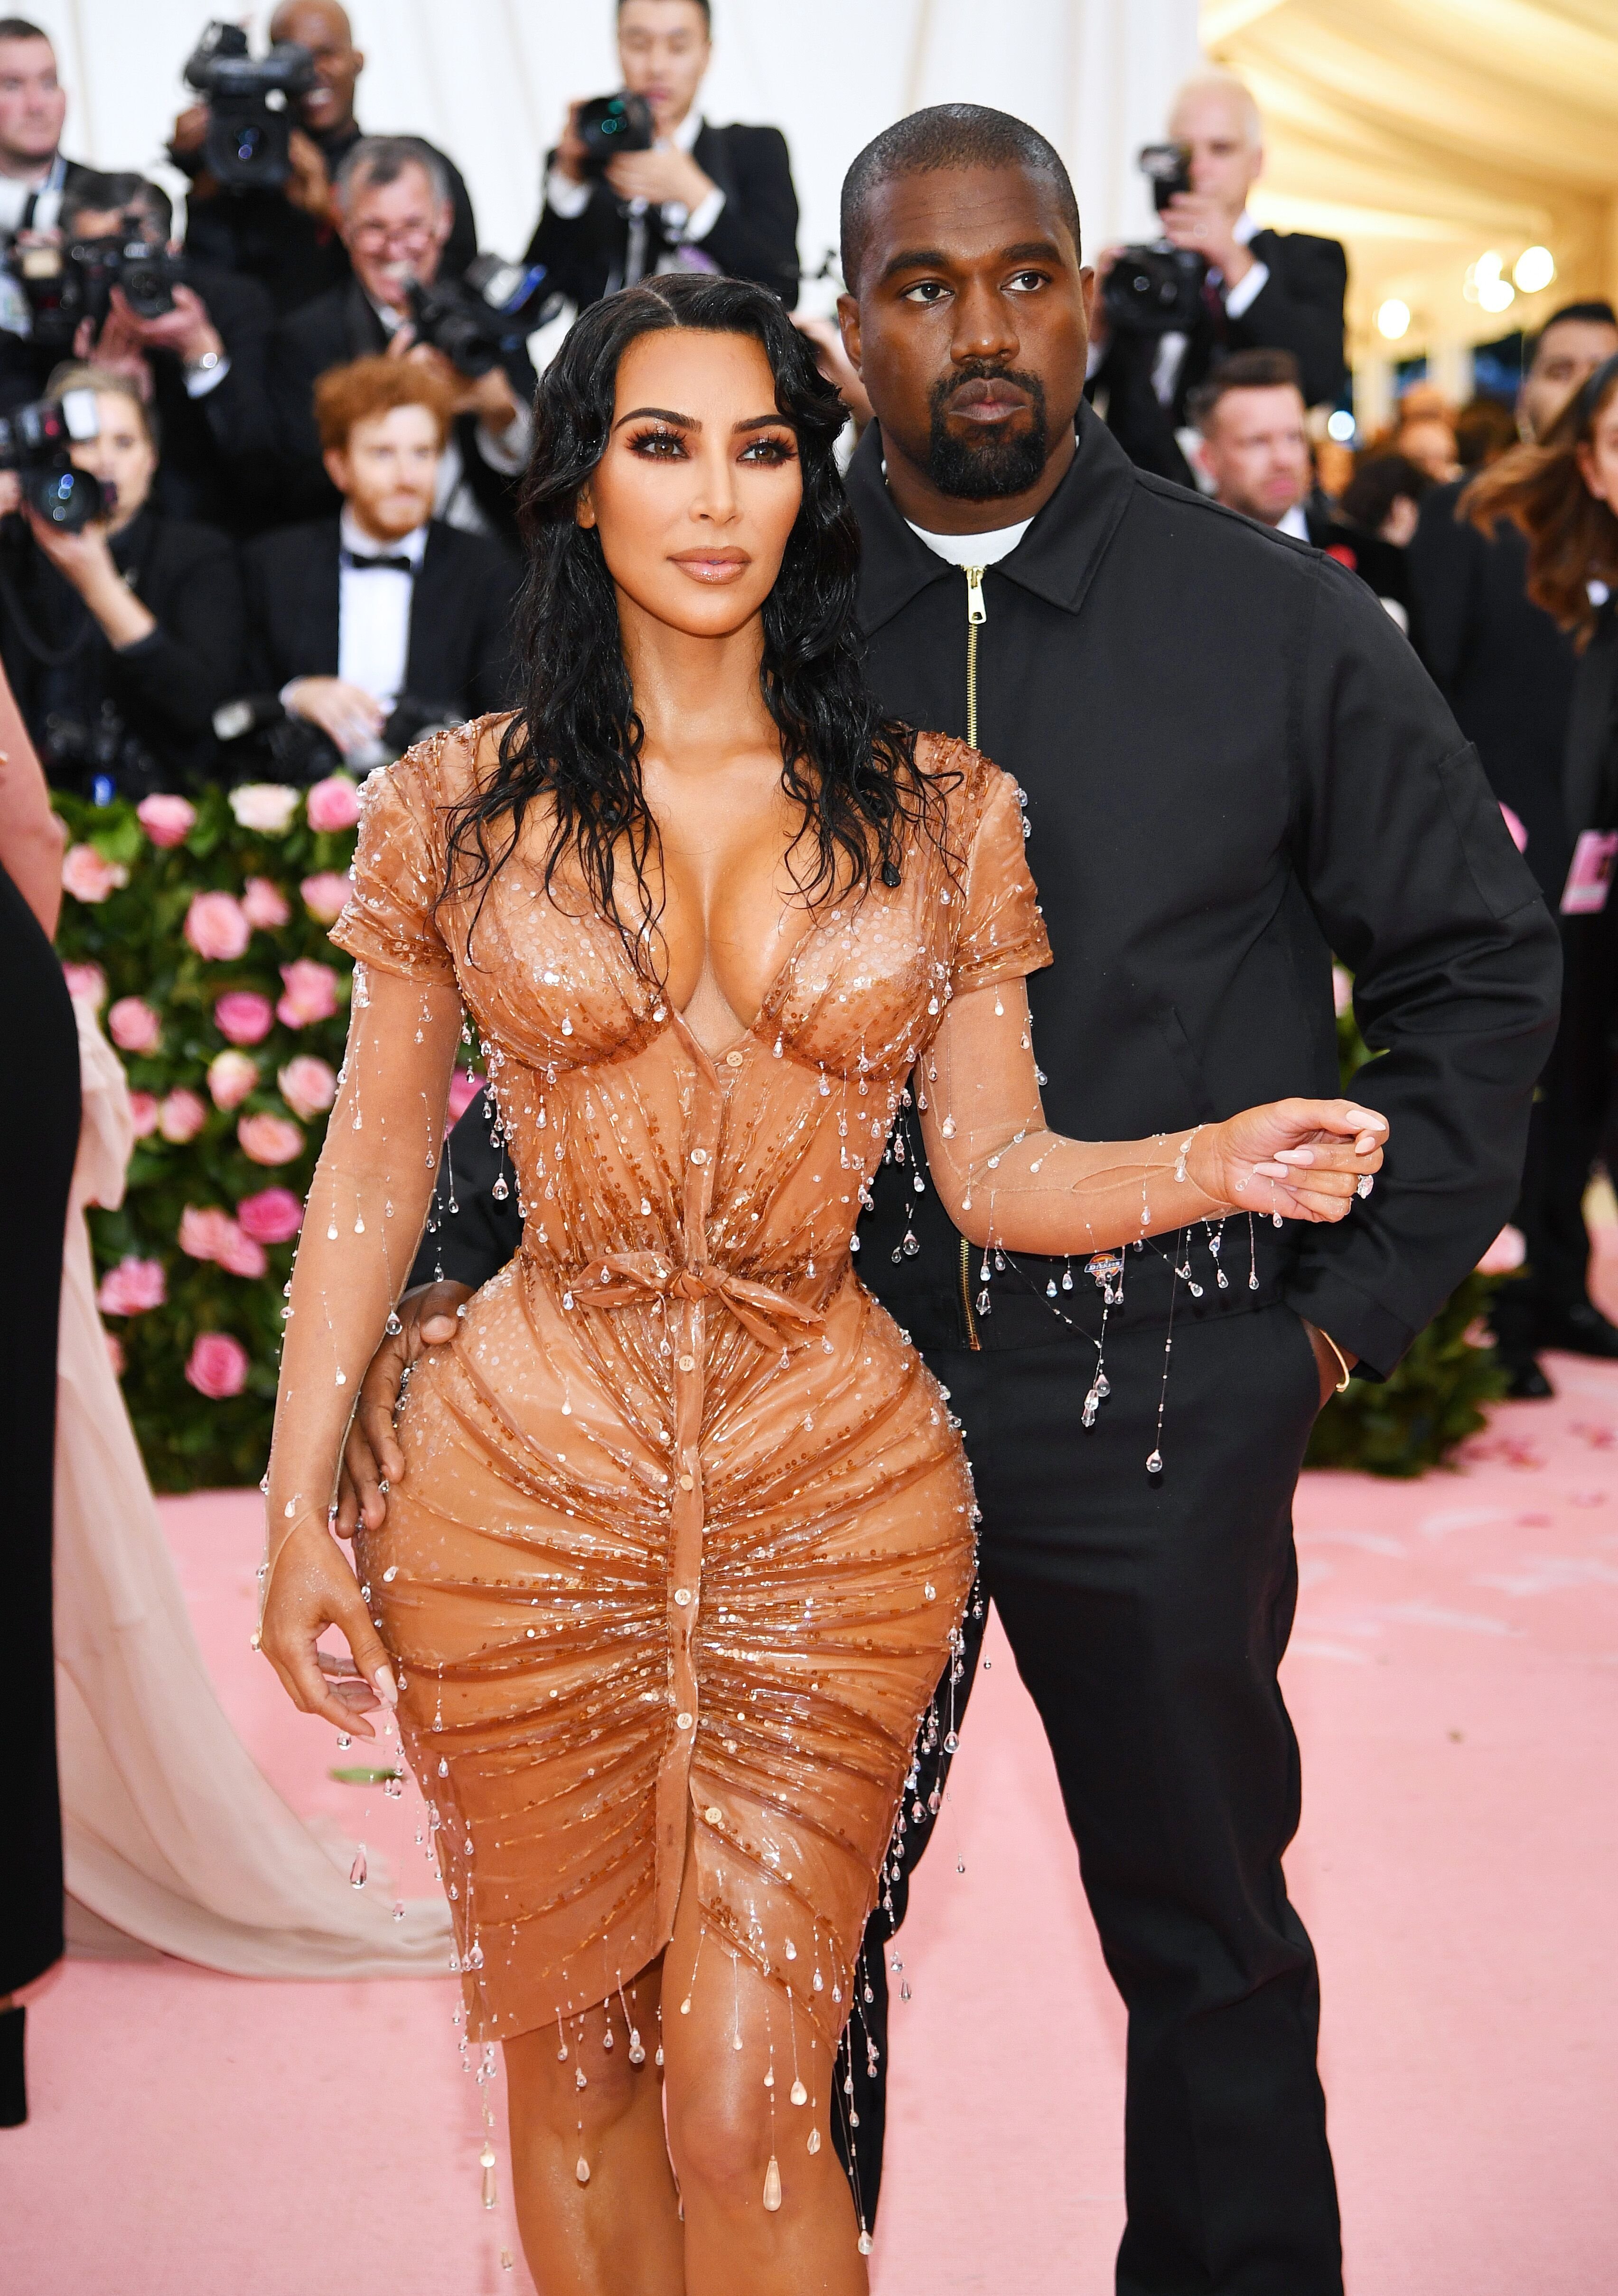 Kim Kardashian West and Kanye West attend The Met Gala on May 06, 2019 in New York City | Photo: Getty Images